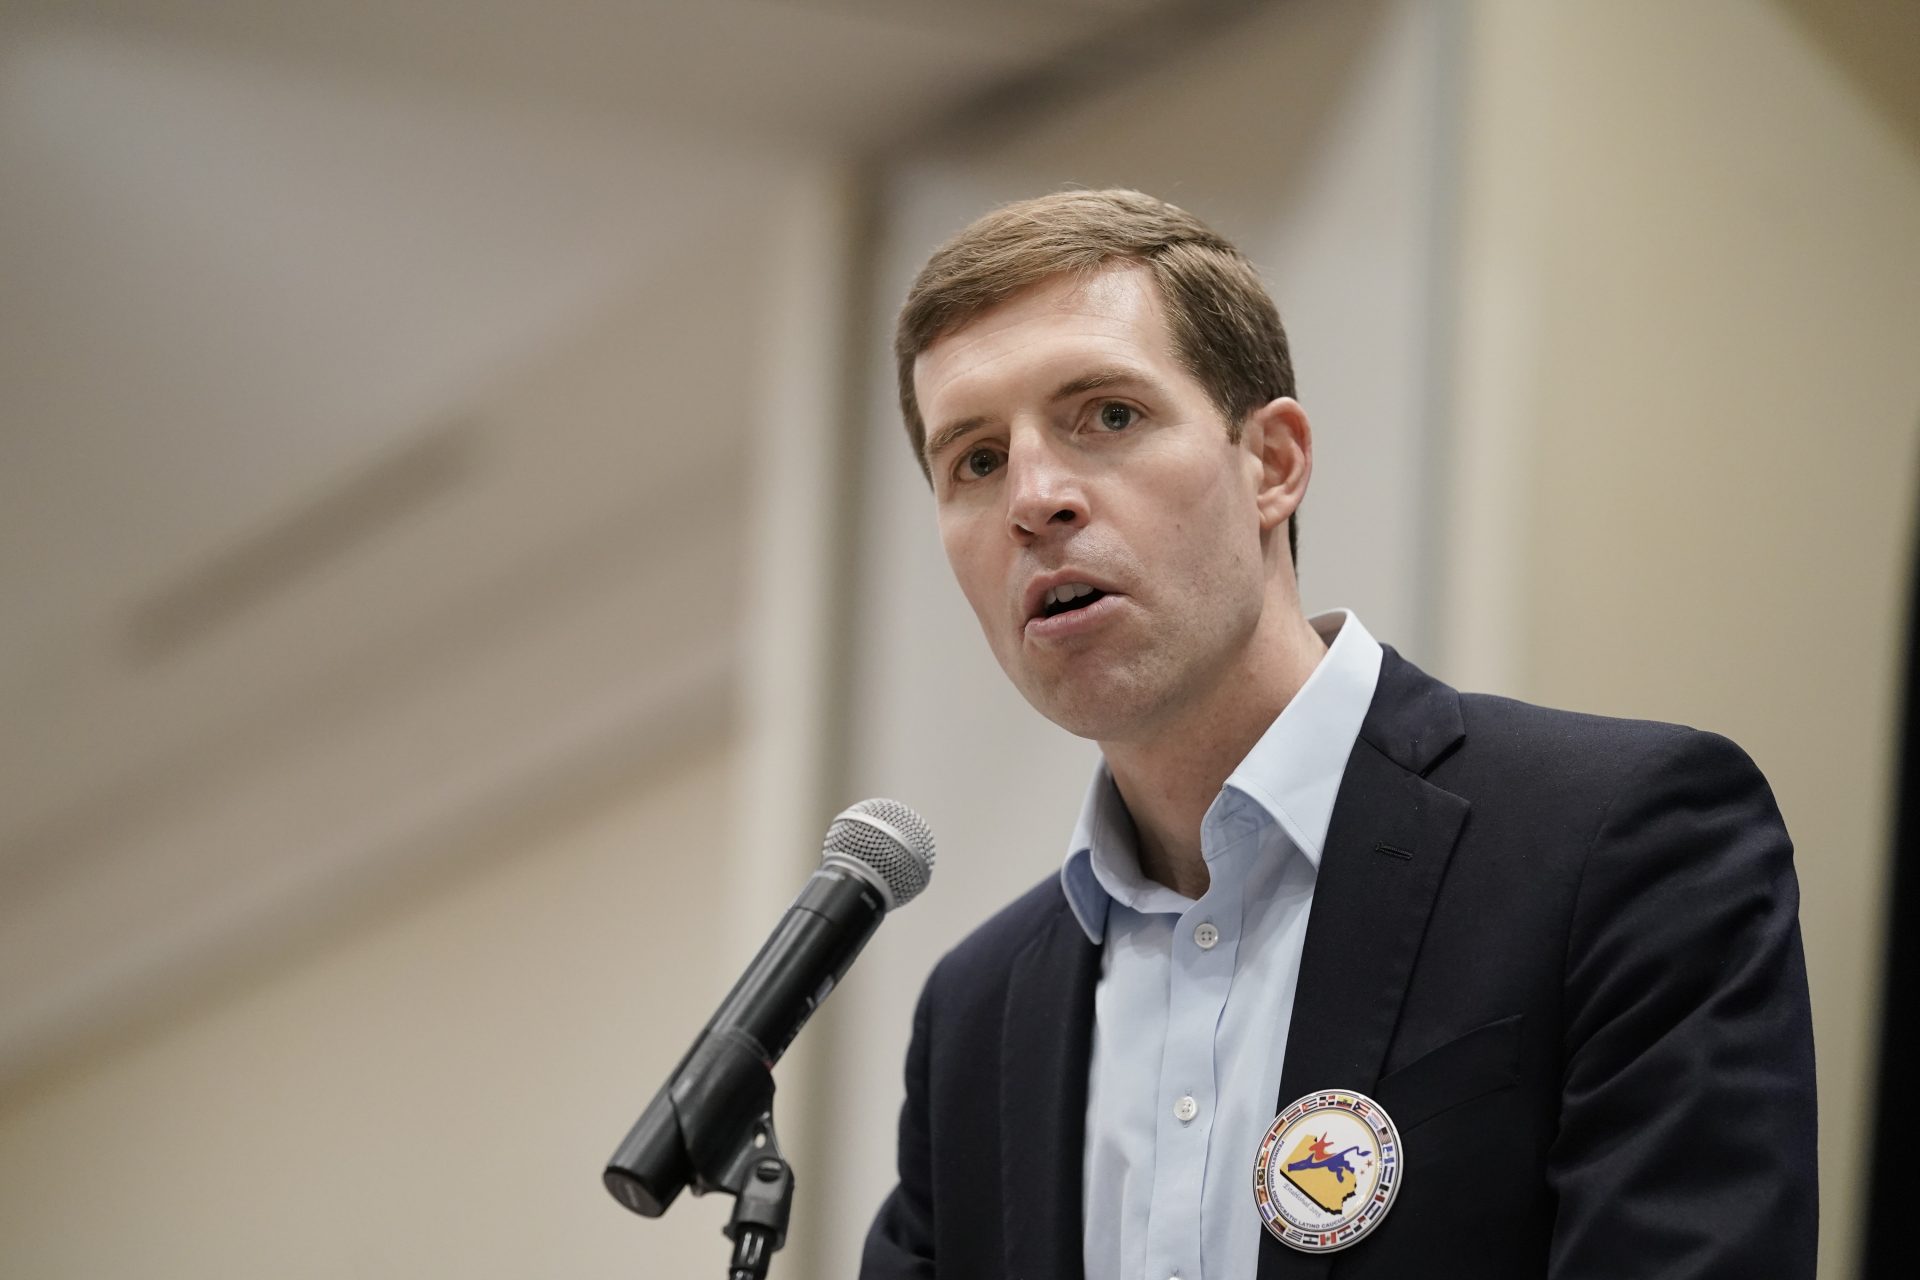 U.S. Senate candidate Rep. Conor Lamb, D-Pa., speaks during a meeting of the Pennsylvania Democratic Party State Committee in Harrisburg, Pa., Saturday, Jan. 29, 2022.